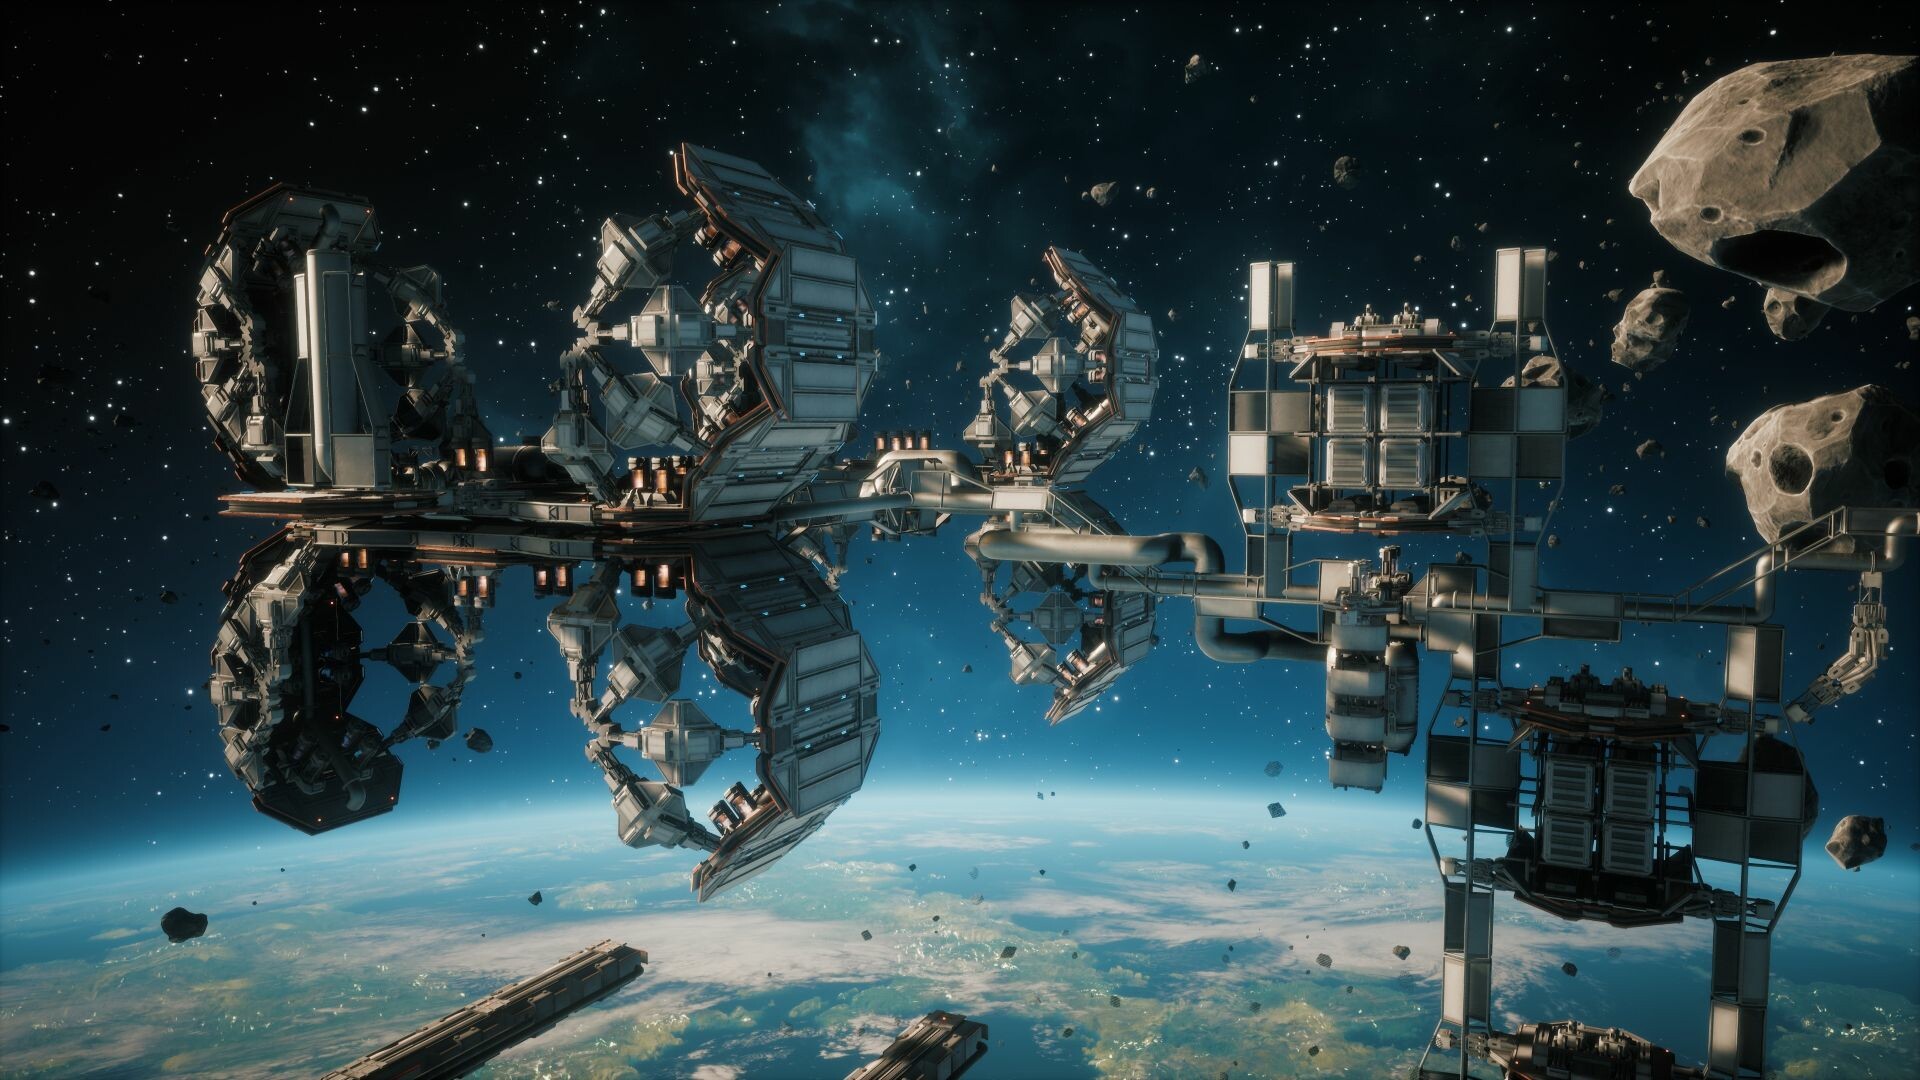 Space Station: Video game, Everspace, The Hundred, Galactic, Void, Orbit. 1920x1080 Full HD Wallpaper.